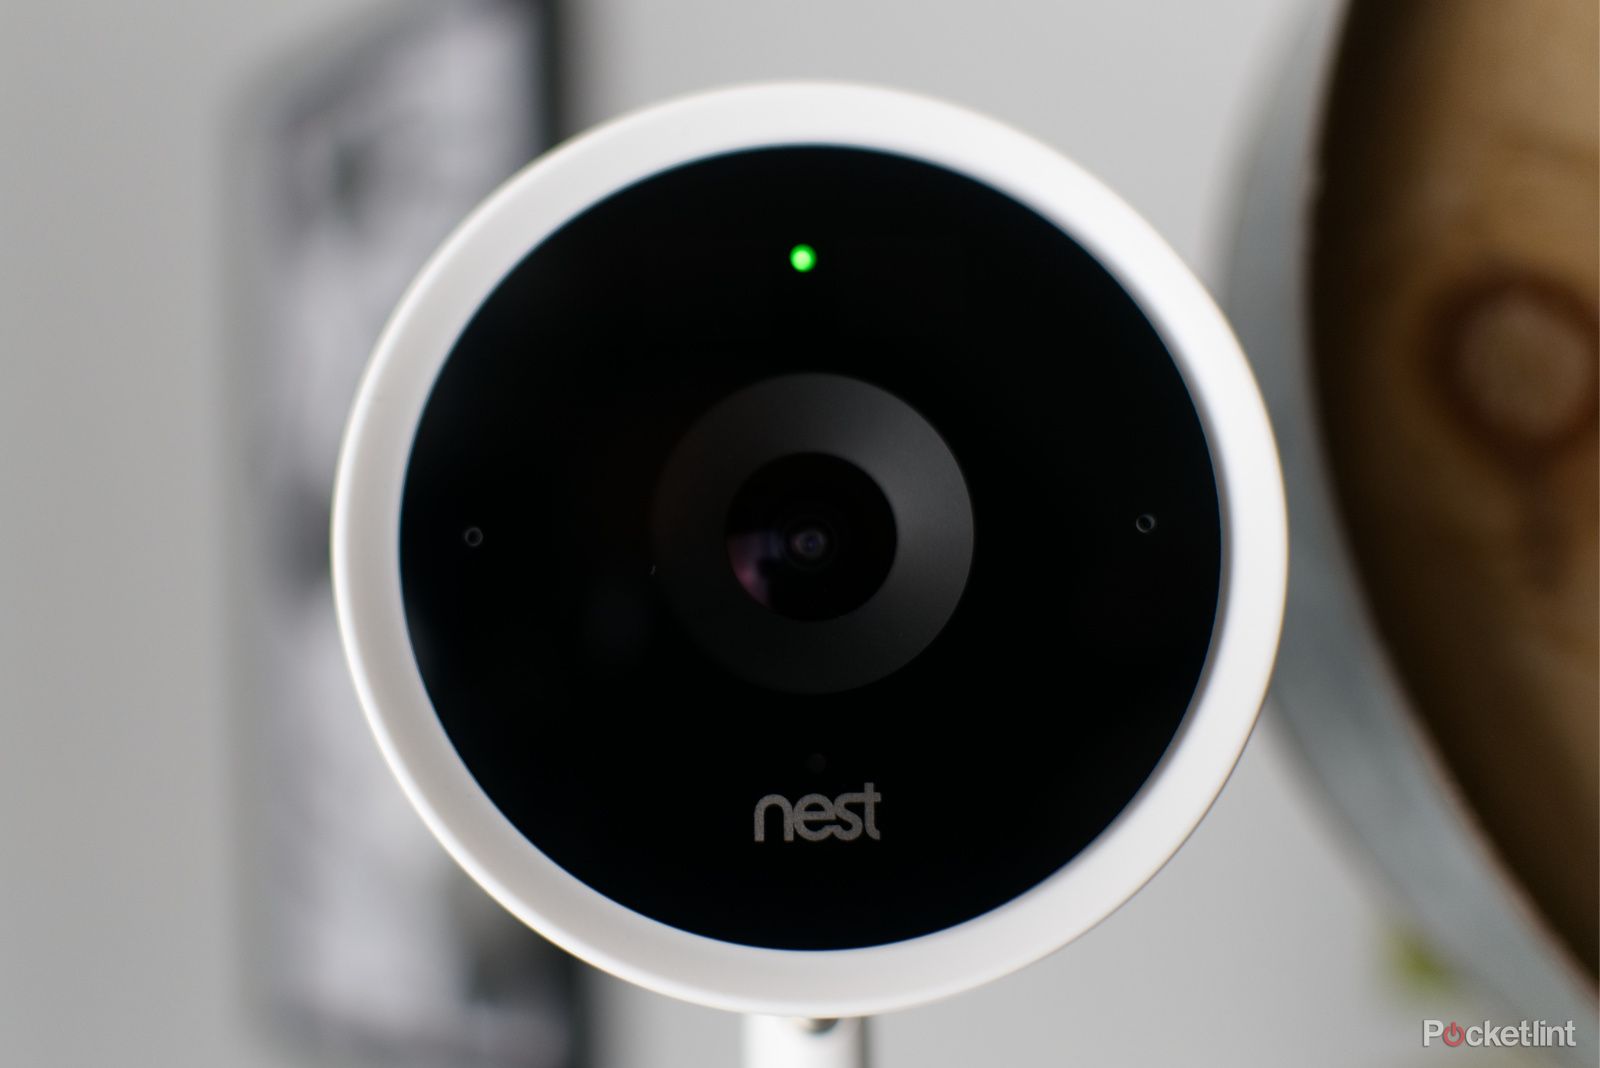 Mystery Google 'wireless streaming device' passes through the FCC - could it be a new Nest Cam? photo 2